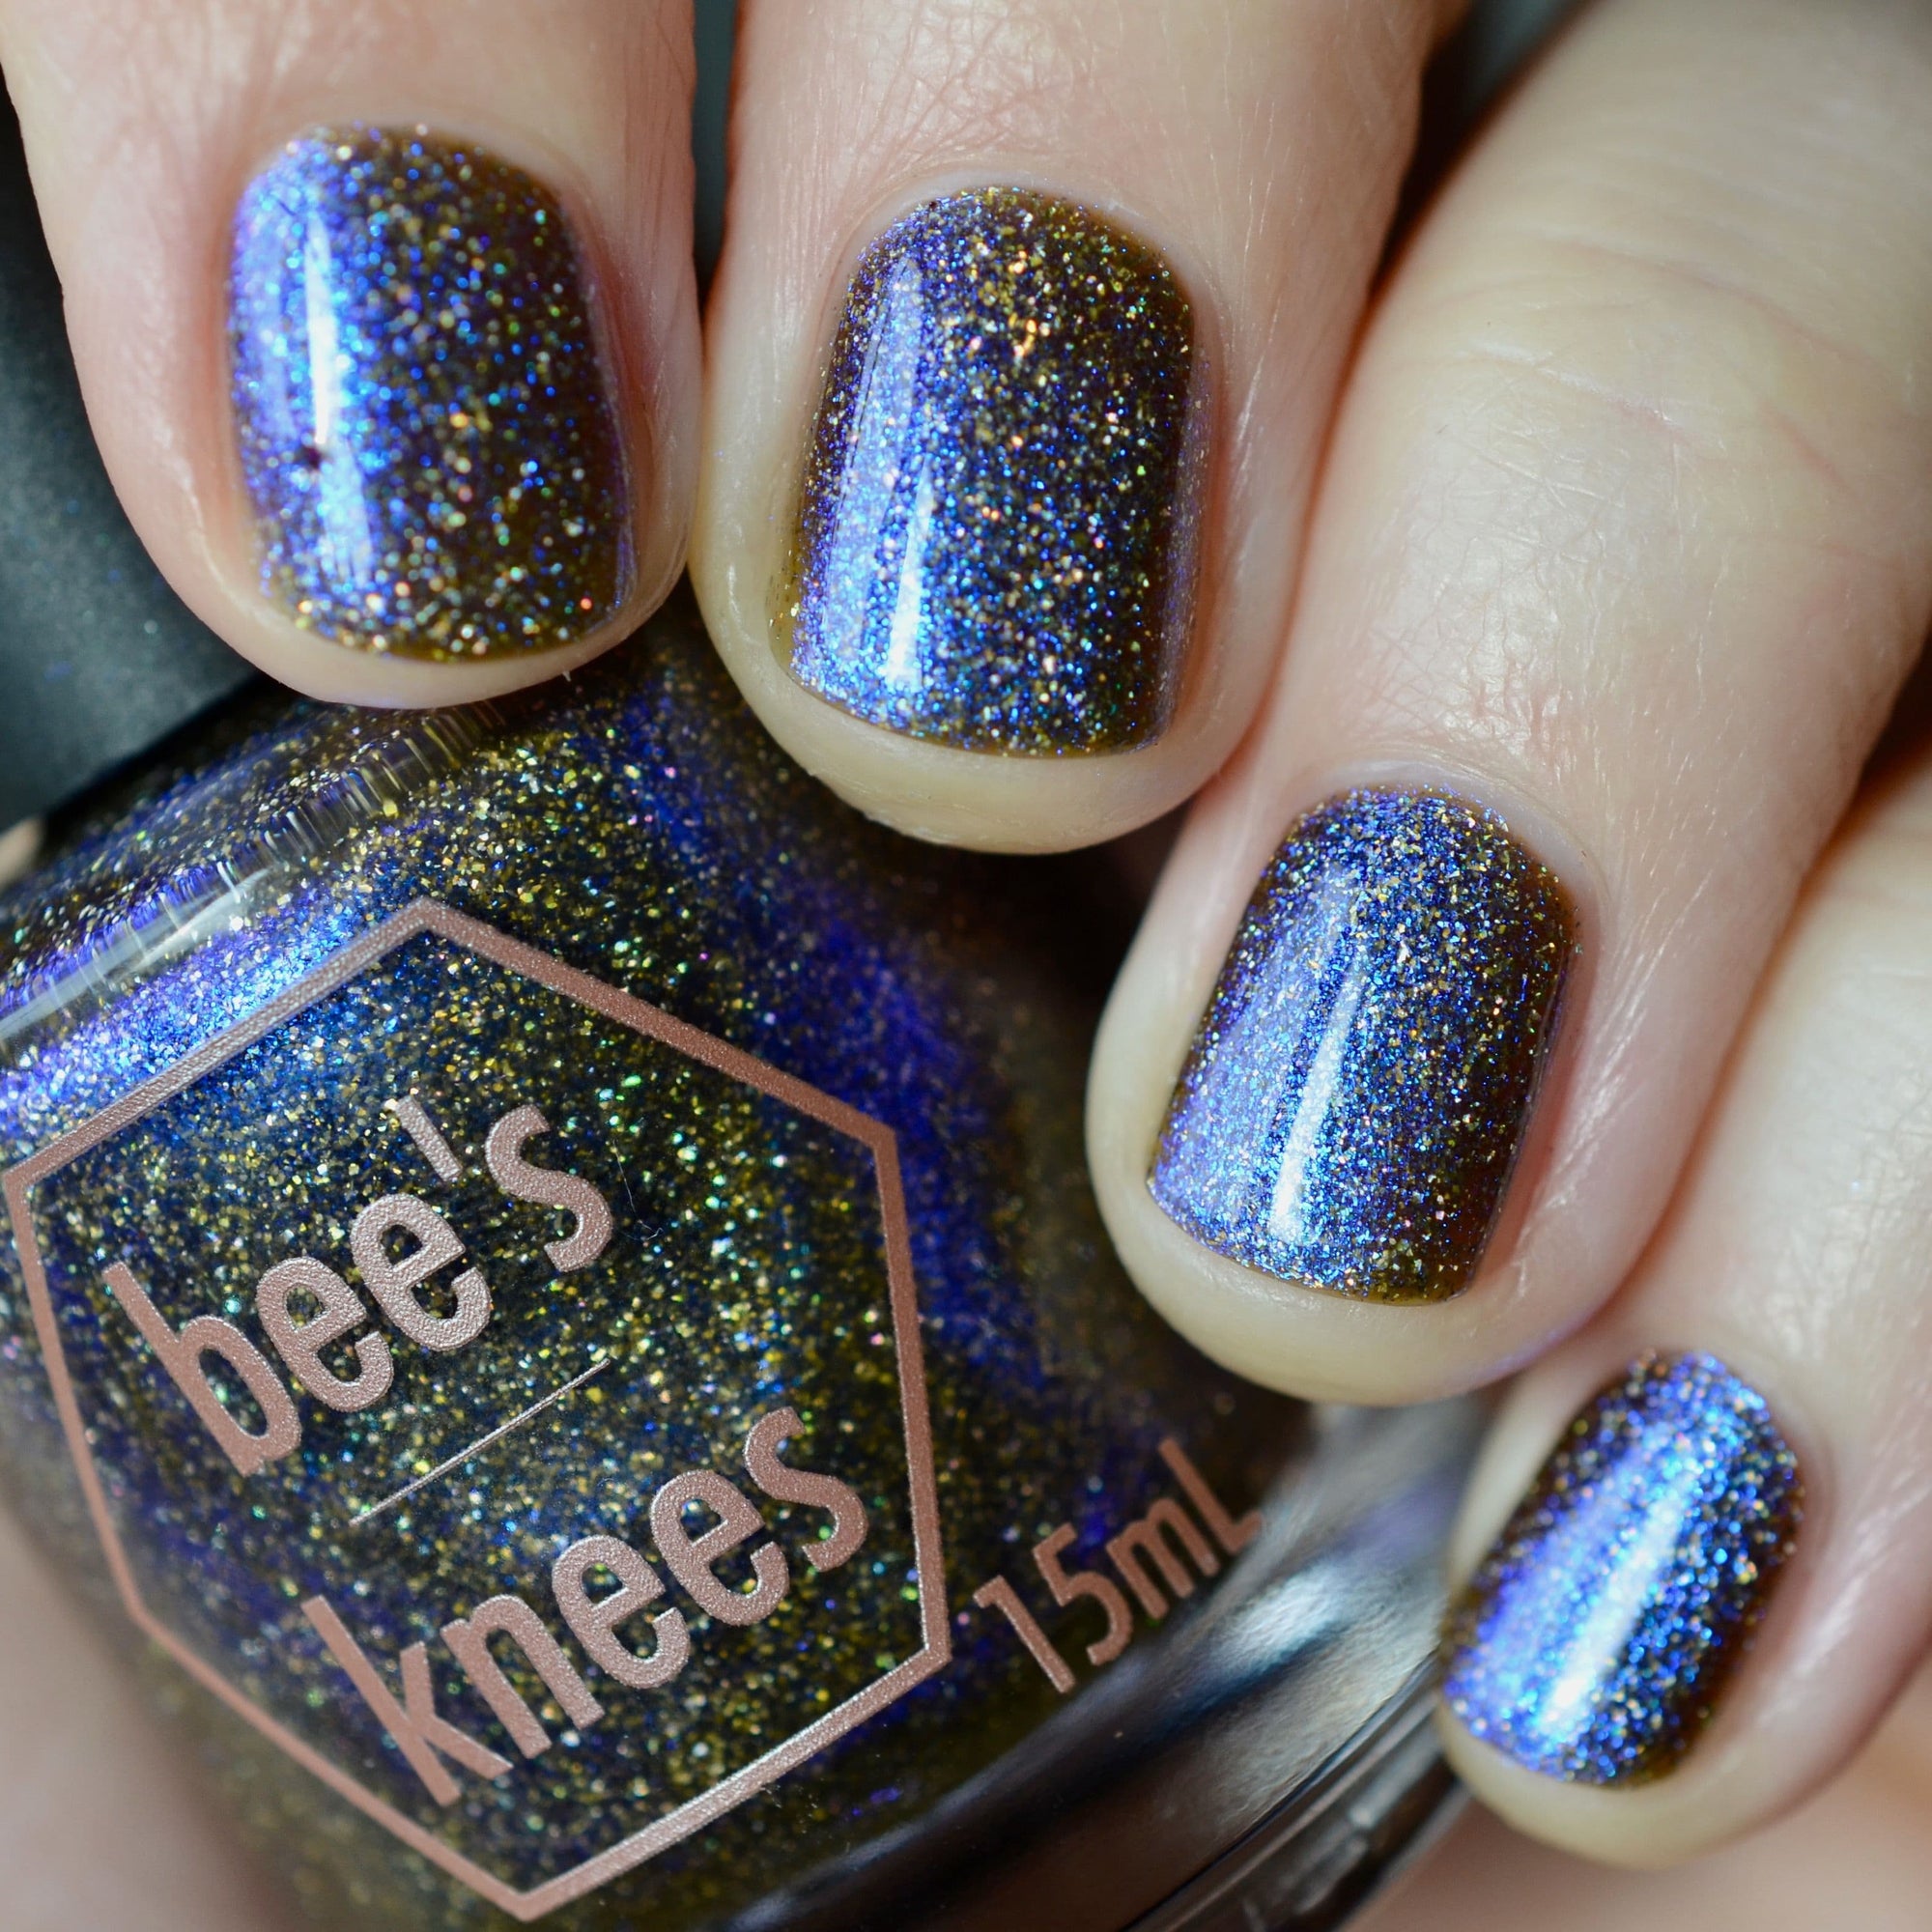 *PRE-ORDER* Bee's Knees Lacquer - Wyrd